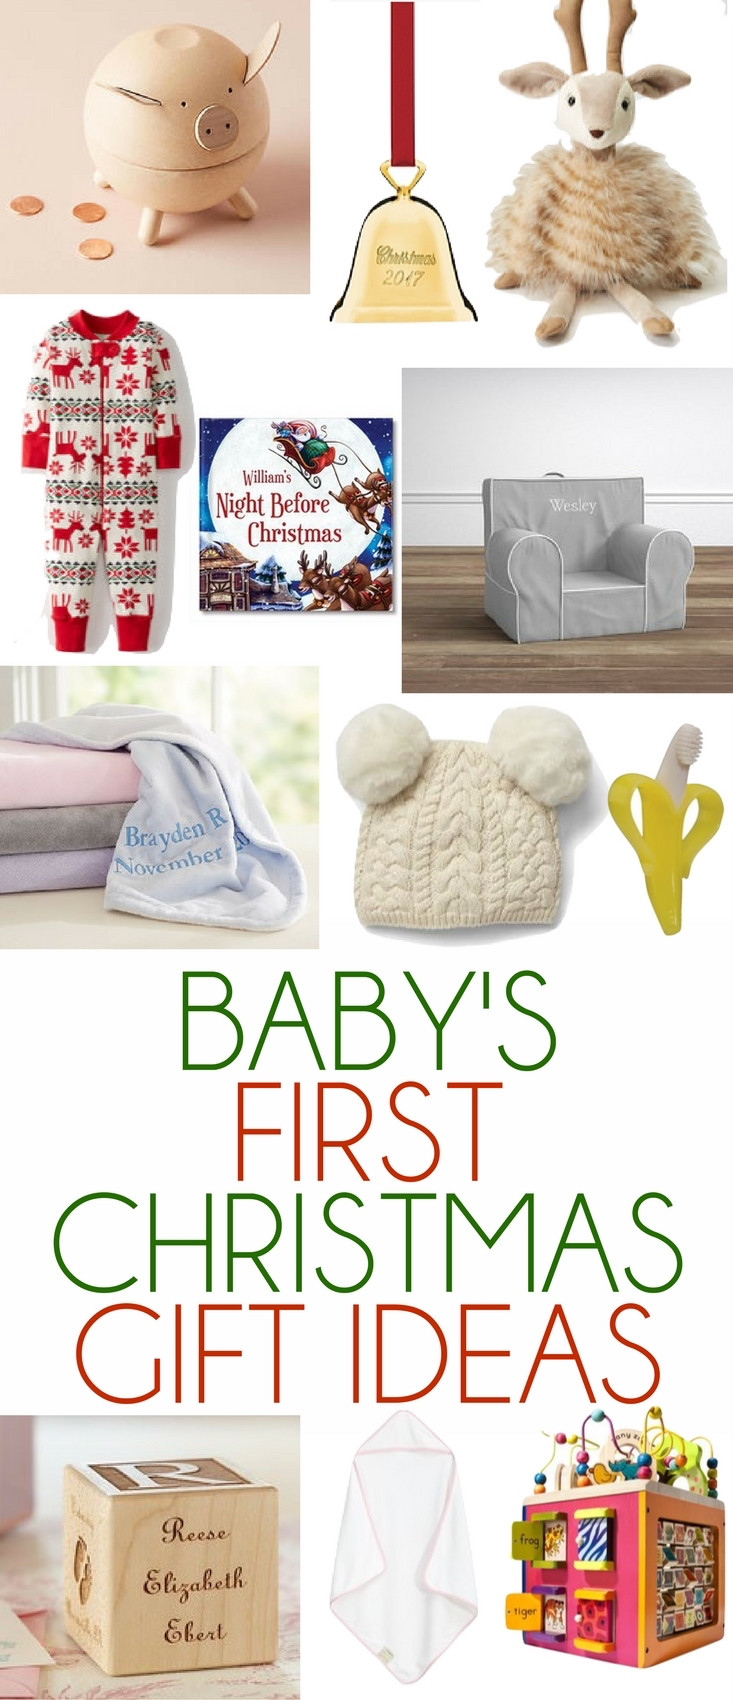 Baby Christmas Gift Ideas
 Baby s First Christmas Gift Ideas Lovely Lucky Life